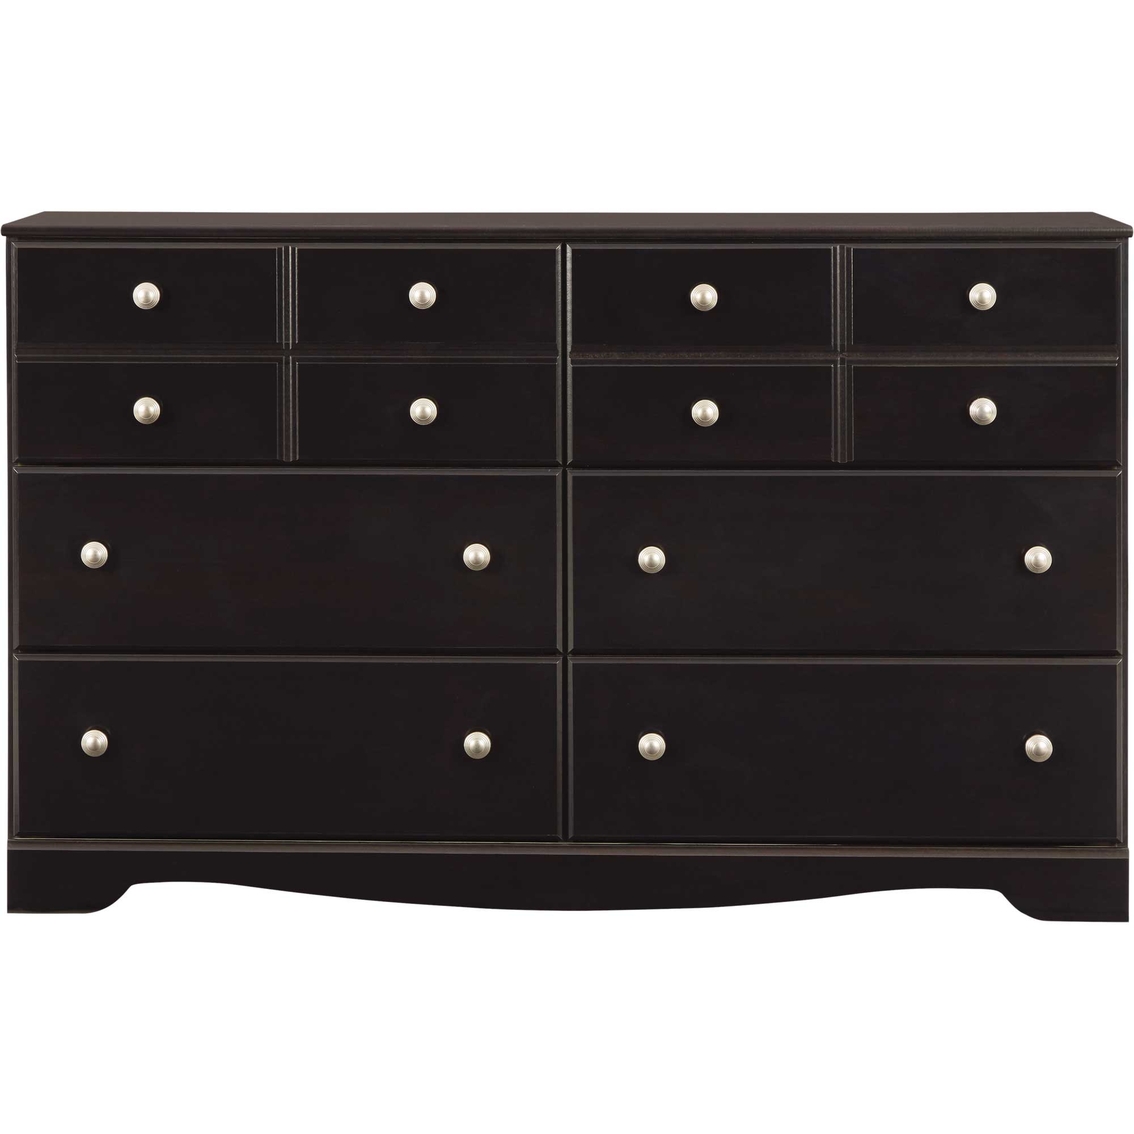 Signature Design by Ashley Mirlotown 6 Drawer Dresser and Mirror - Image 2 of 8